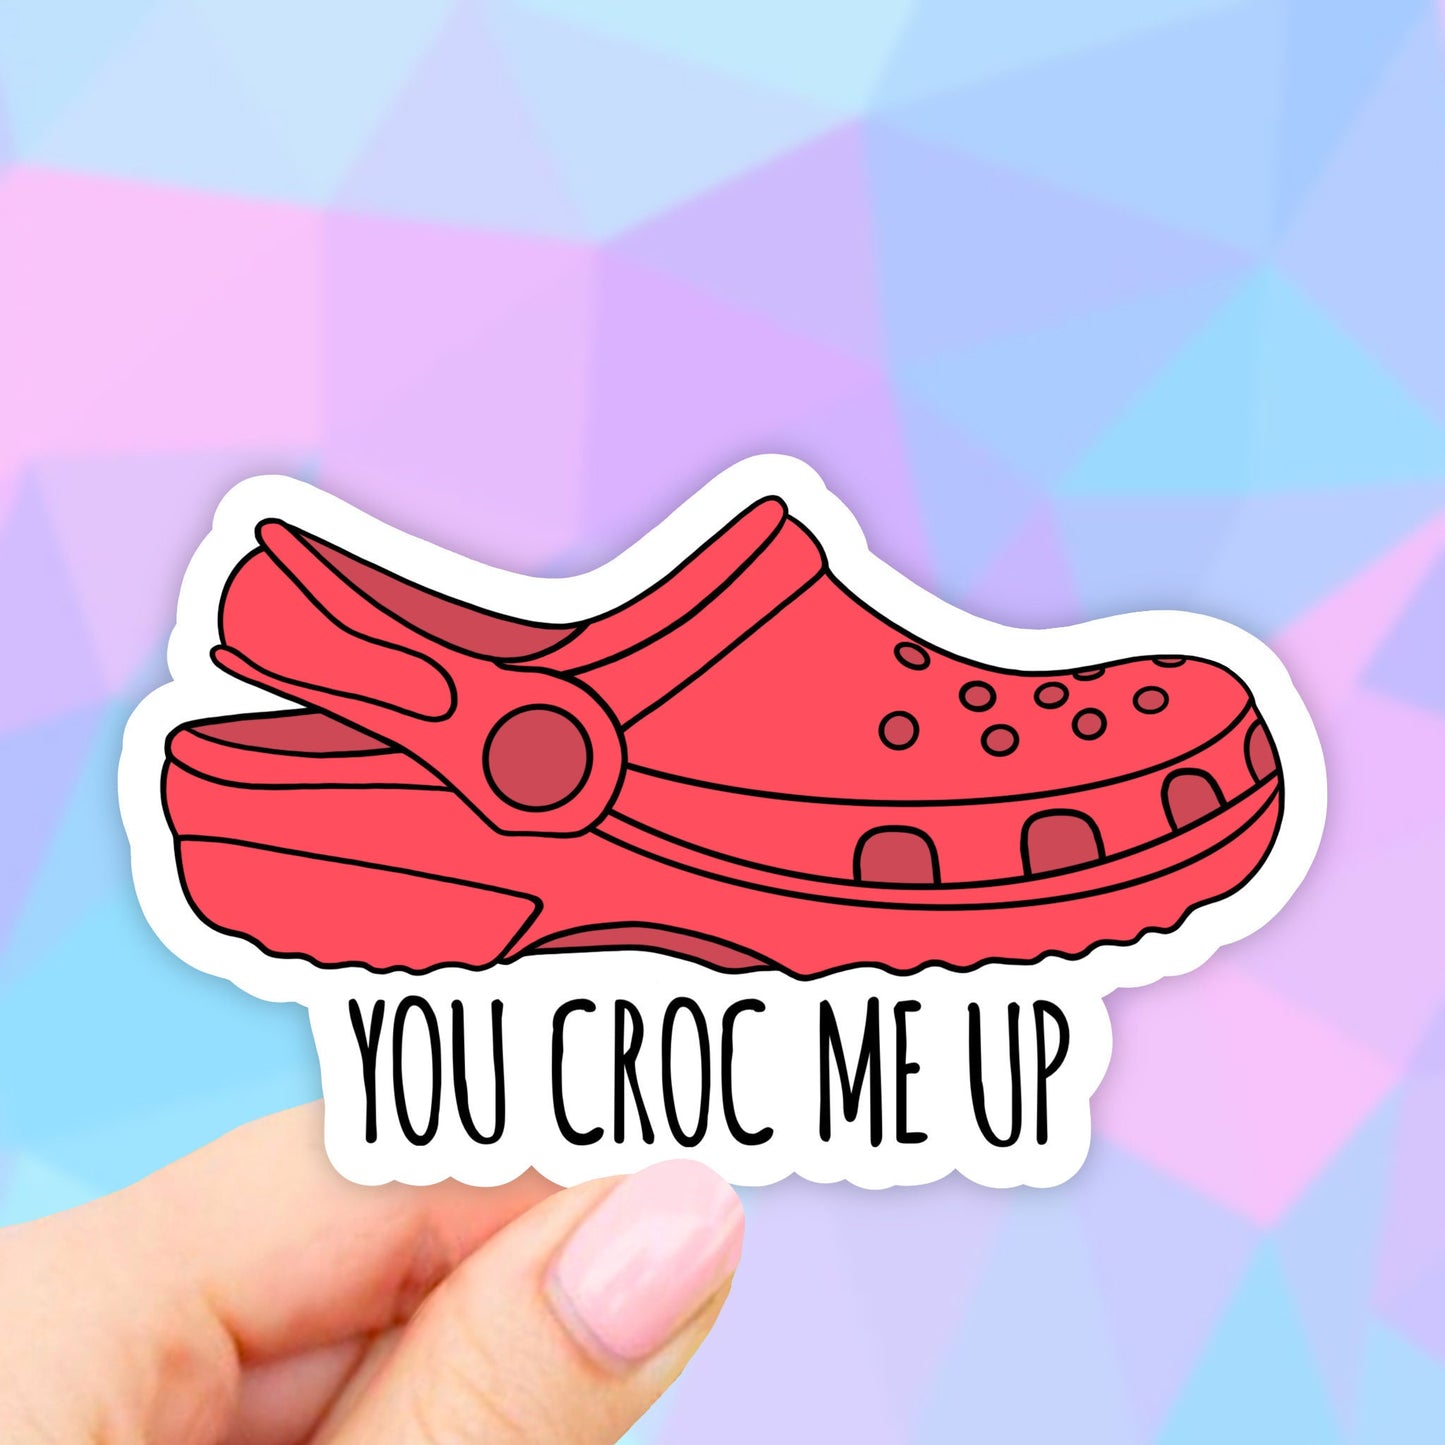 Red You Croc Me Up Sticker, Red Croc Sticker, VSCO Stickers, Croc Stickers, Laptop Stickers, Aesthetic stickers, Crocs decal, Water bottle